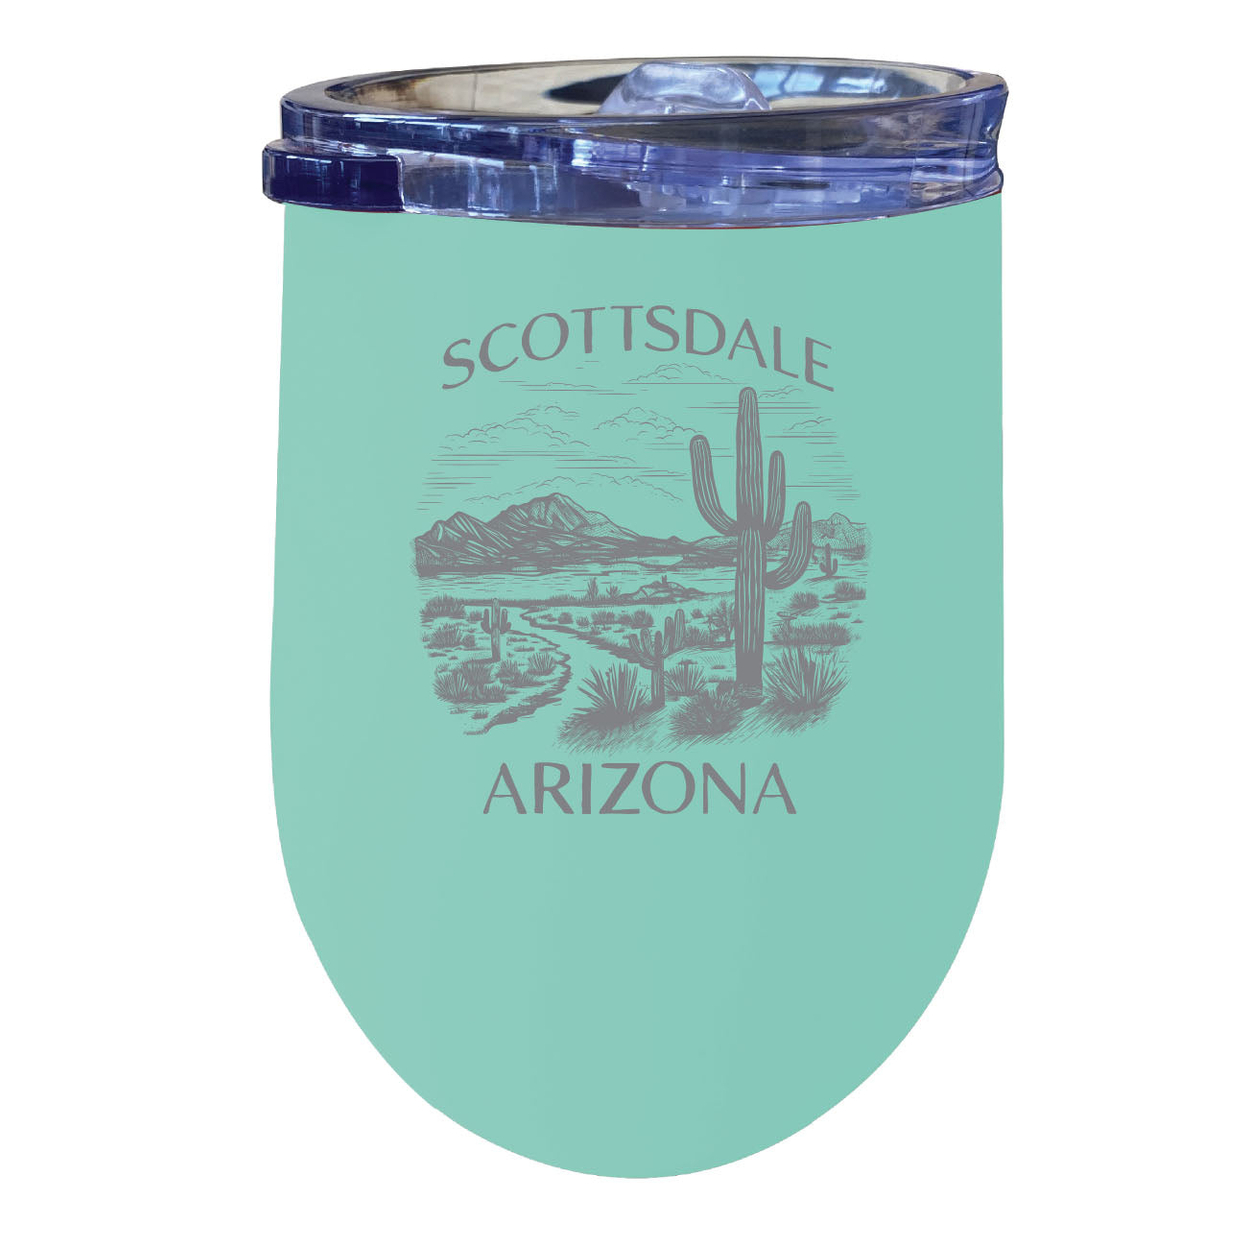 Scottsdale Arizona Souvenir 12 Oz Engraved Insulated Wine Stainless Steel Tumbler - Navy,,2-Pack